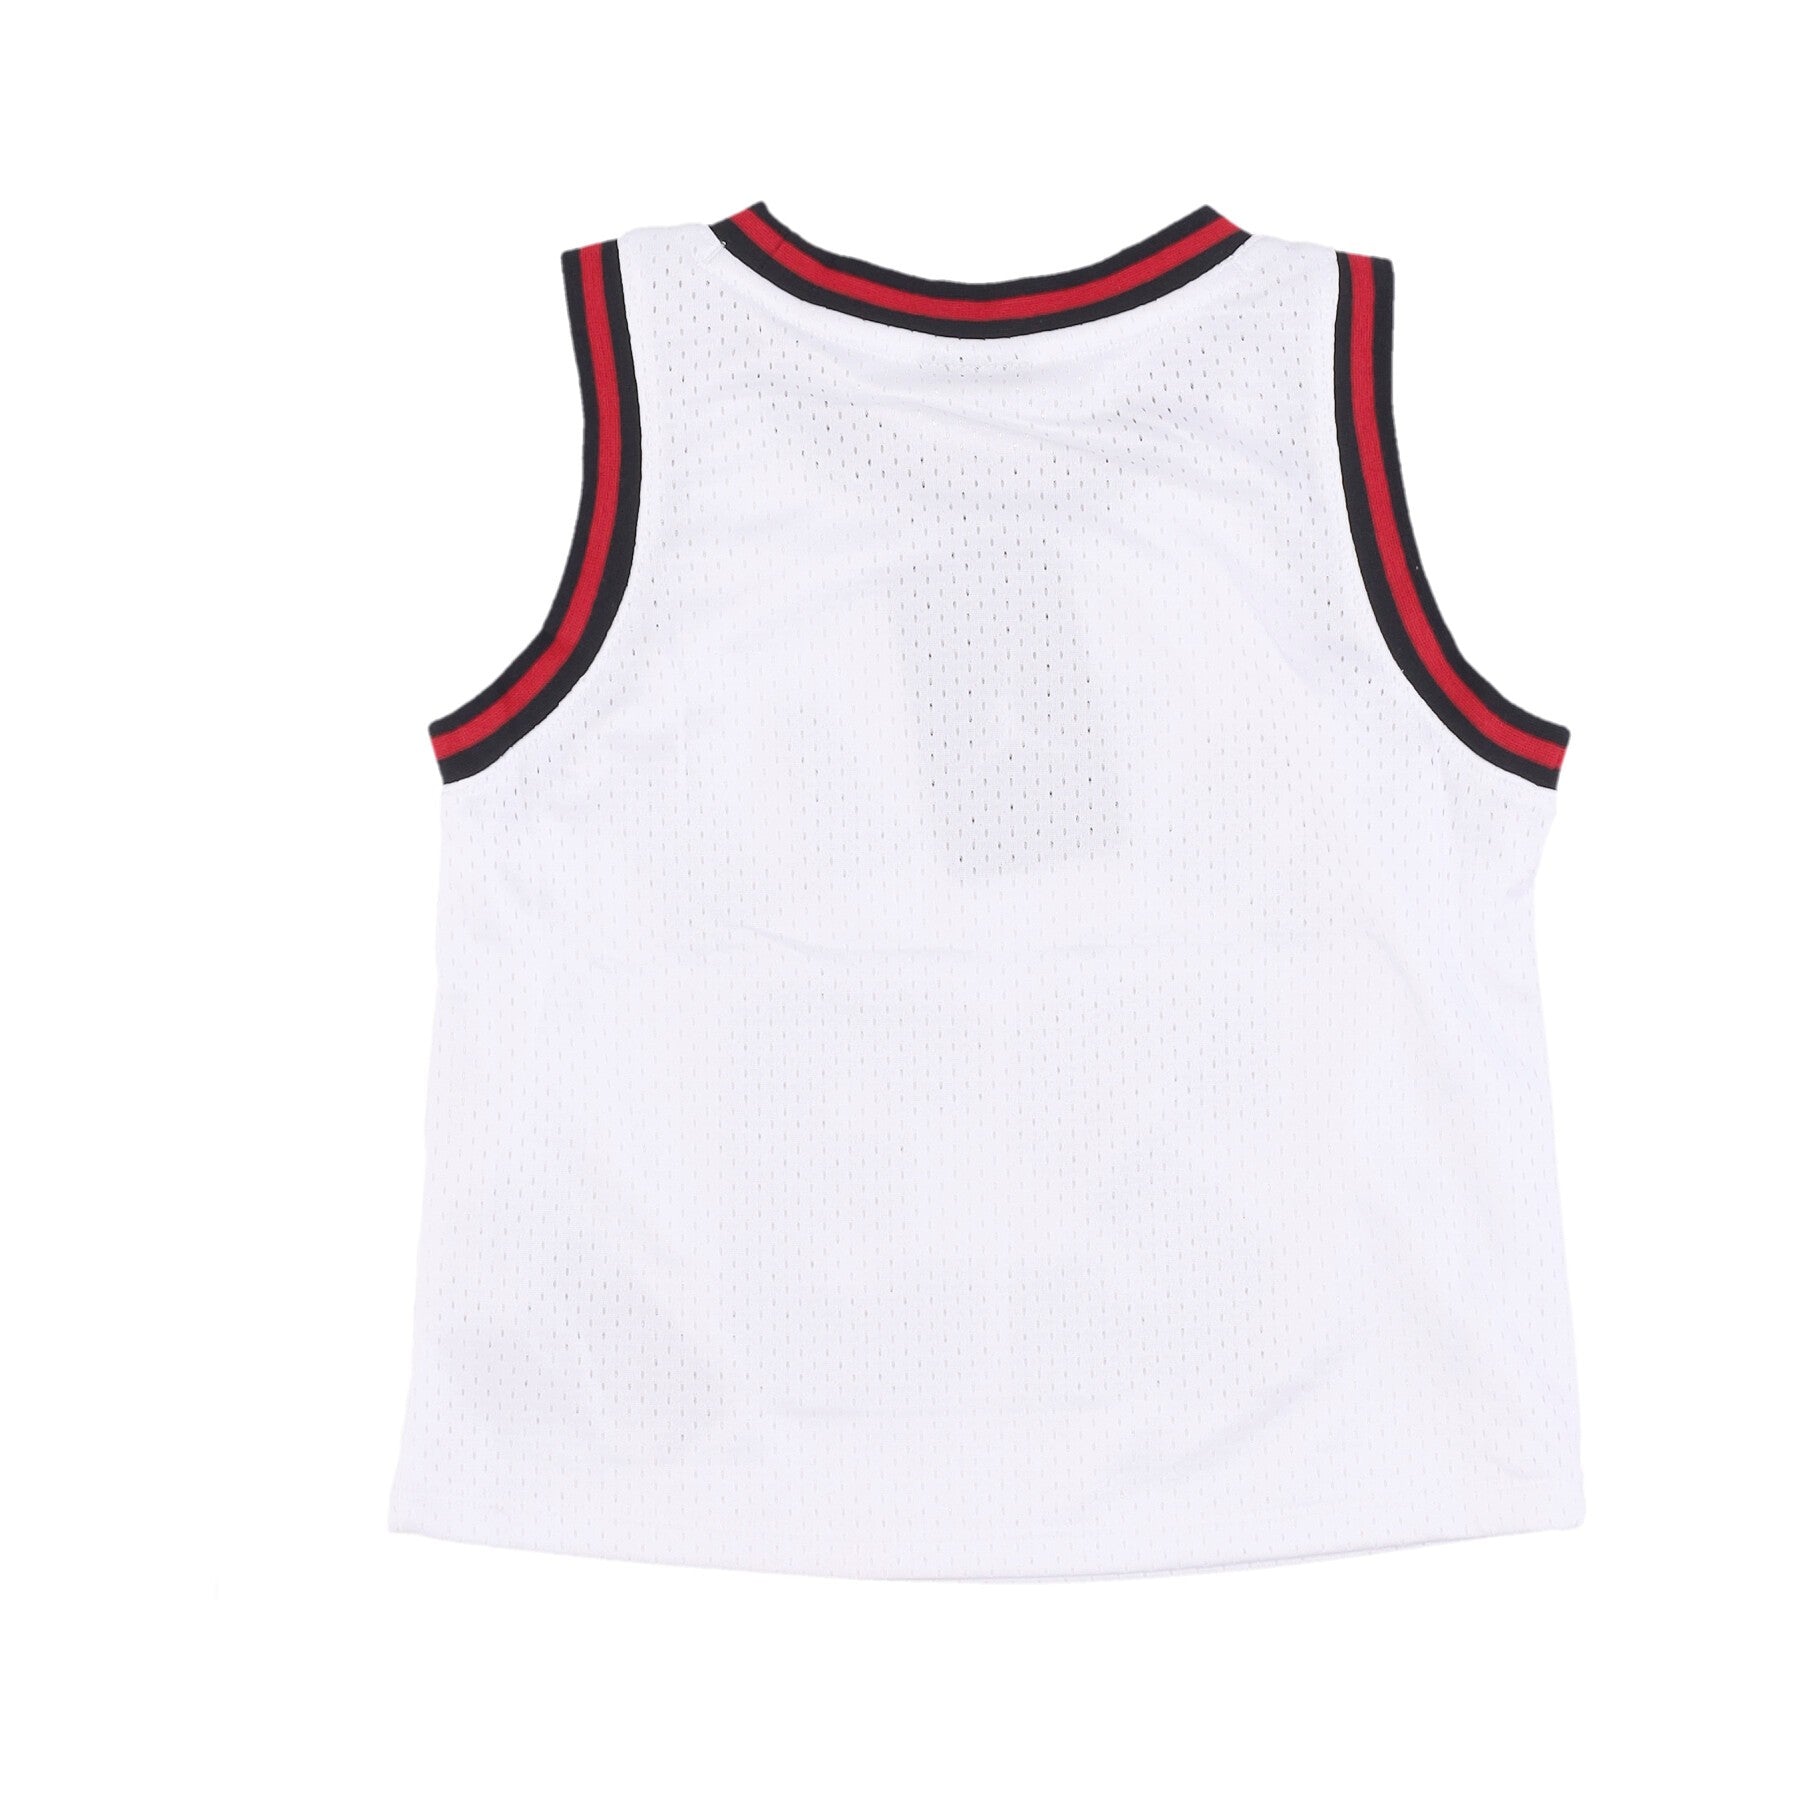 Girl's Recon Cropped Jersey Basketball Tank Top